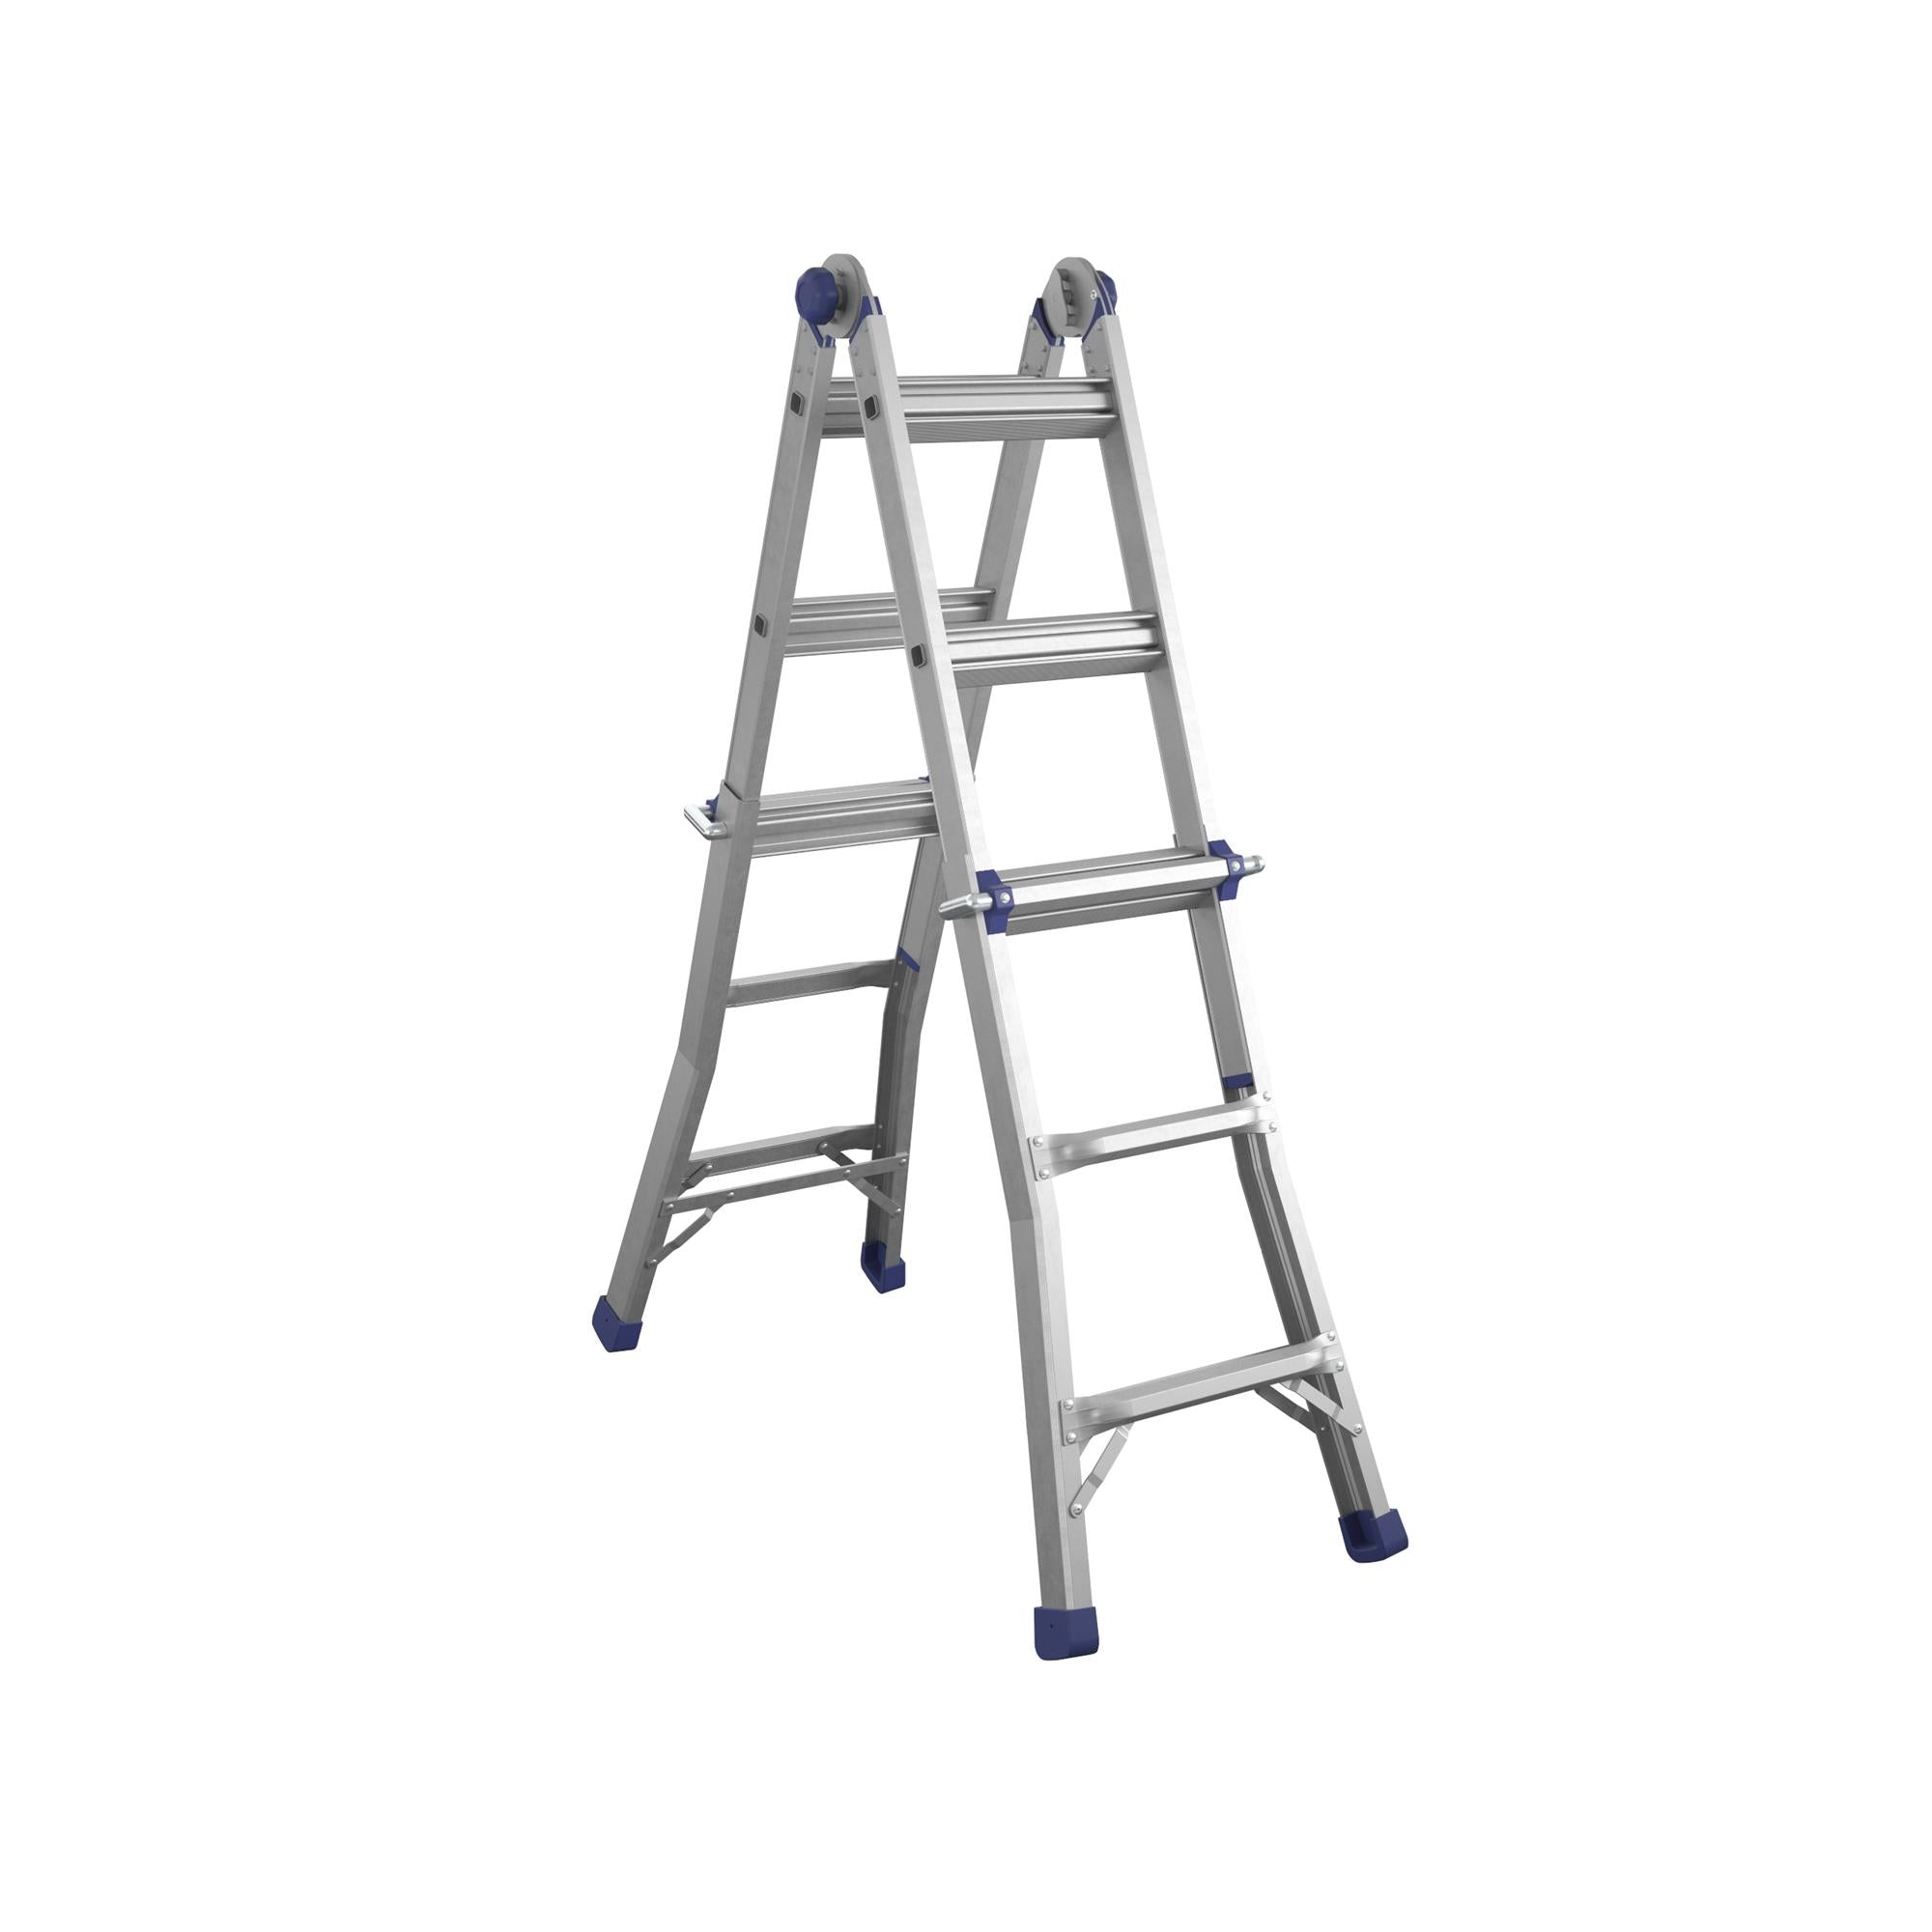 14 Ft. Reach Height Multi-Position Ladder - Cosco